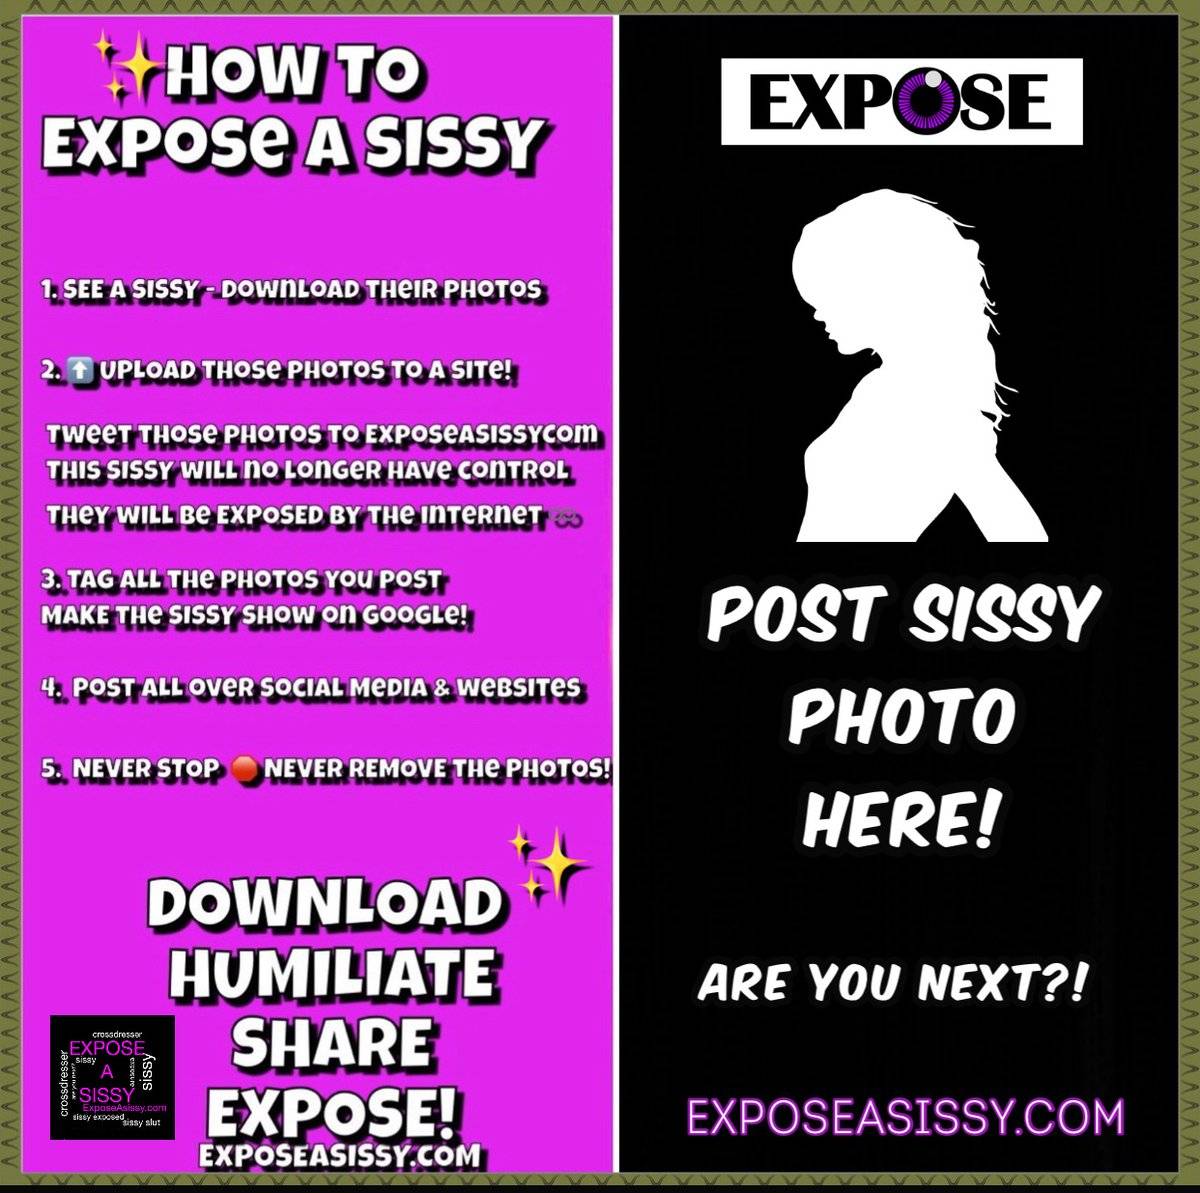 http://exposeasissy.com/How-to-Expose-A-Sissy/index.php/